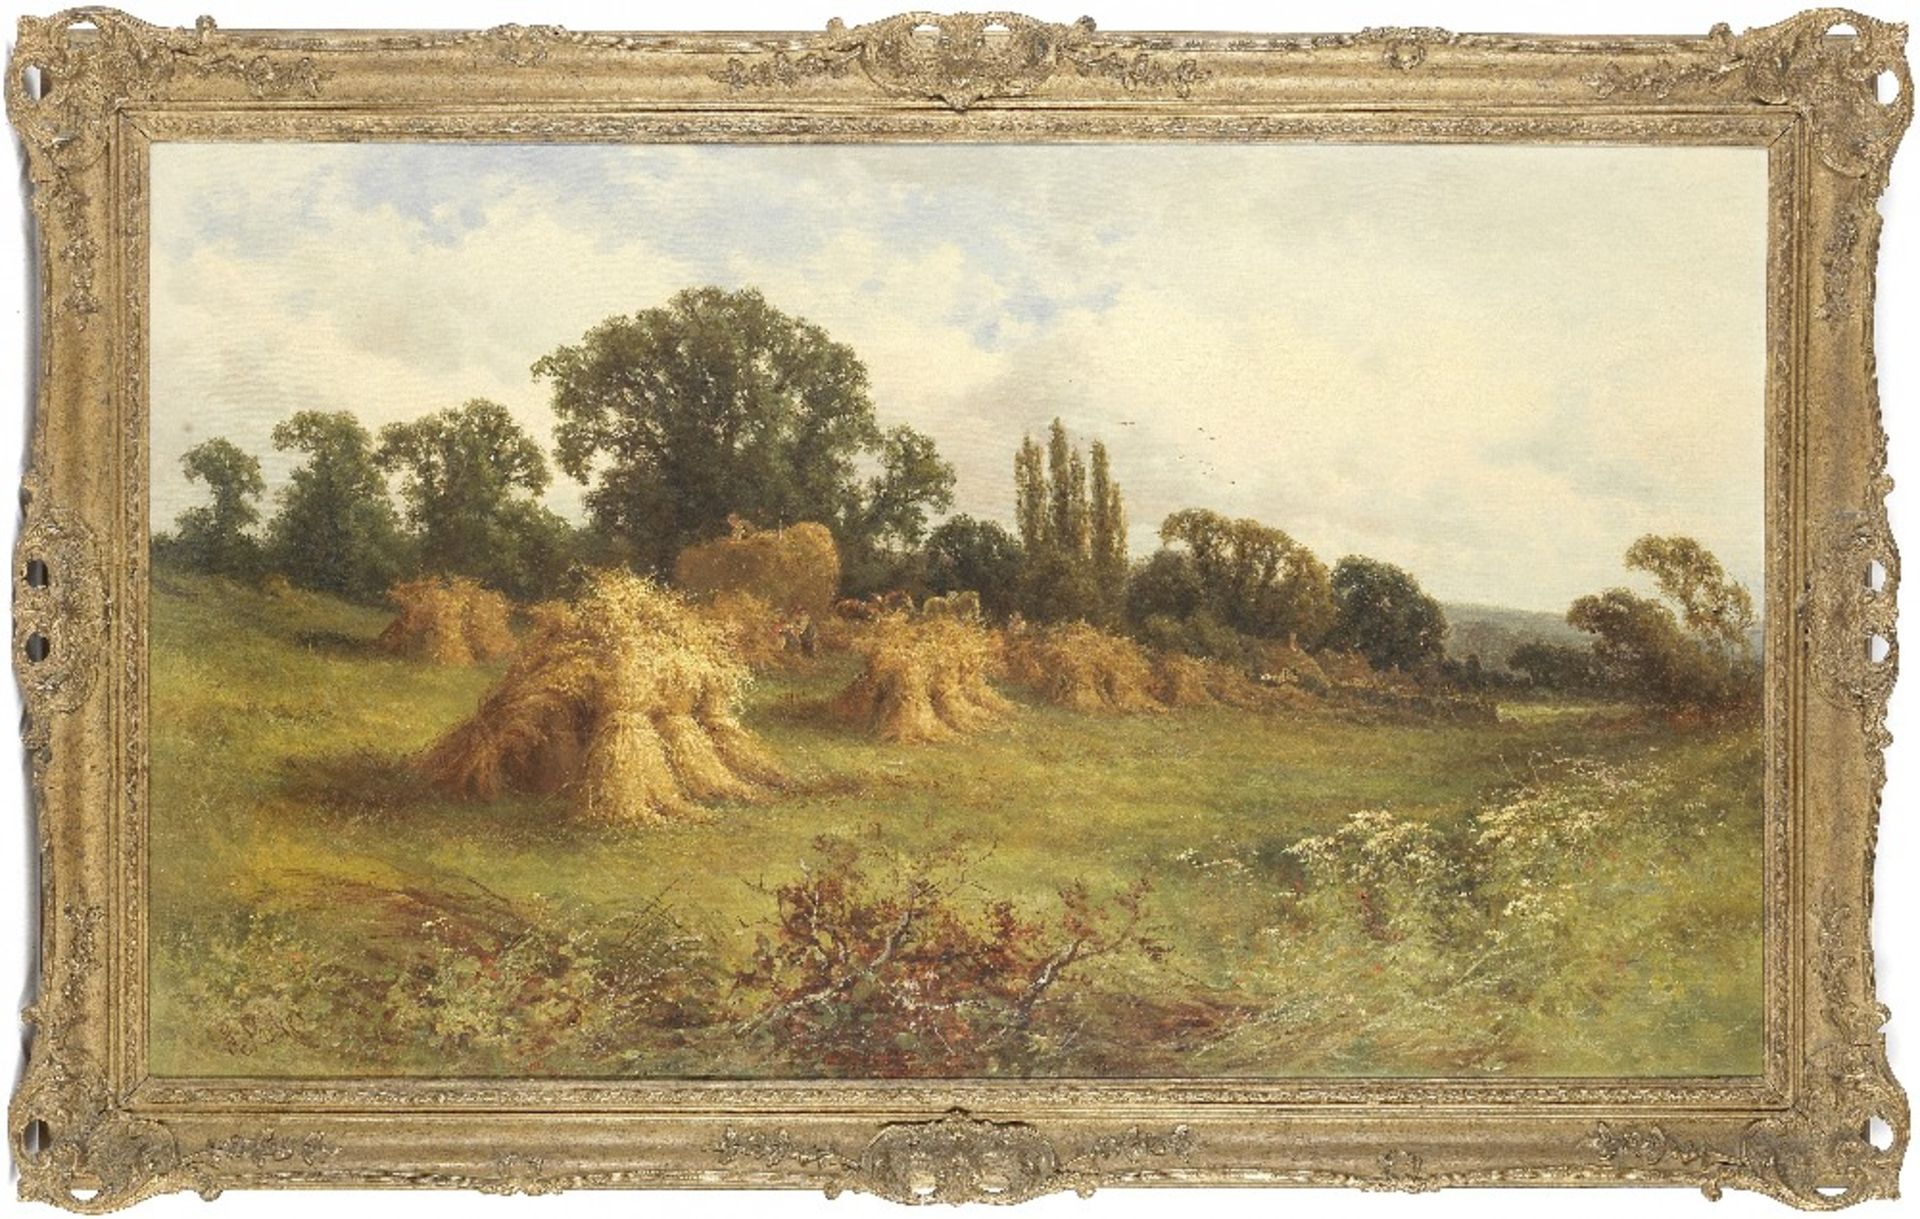 Attributed to Henry H. Parker (British, 1858-1930) Harvest time in the cornfield - Image 2 of 2